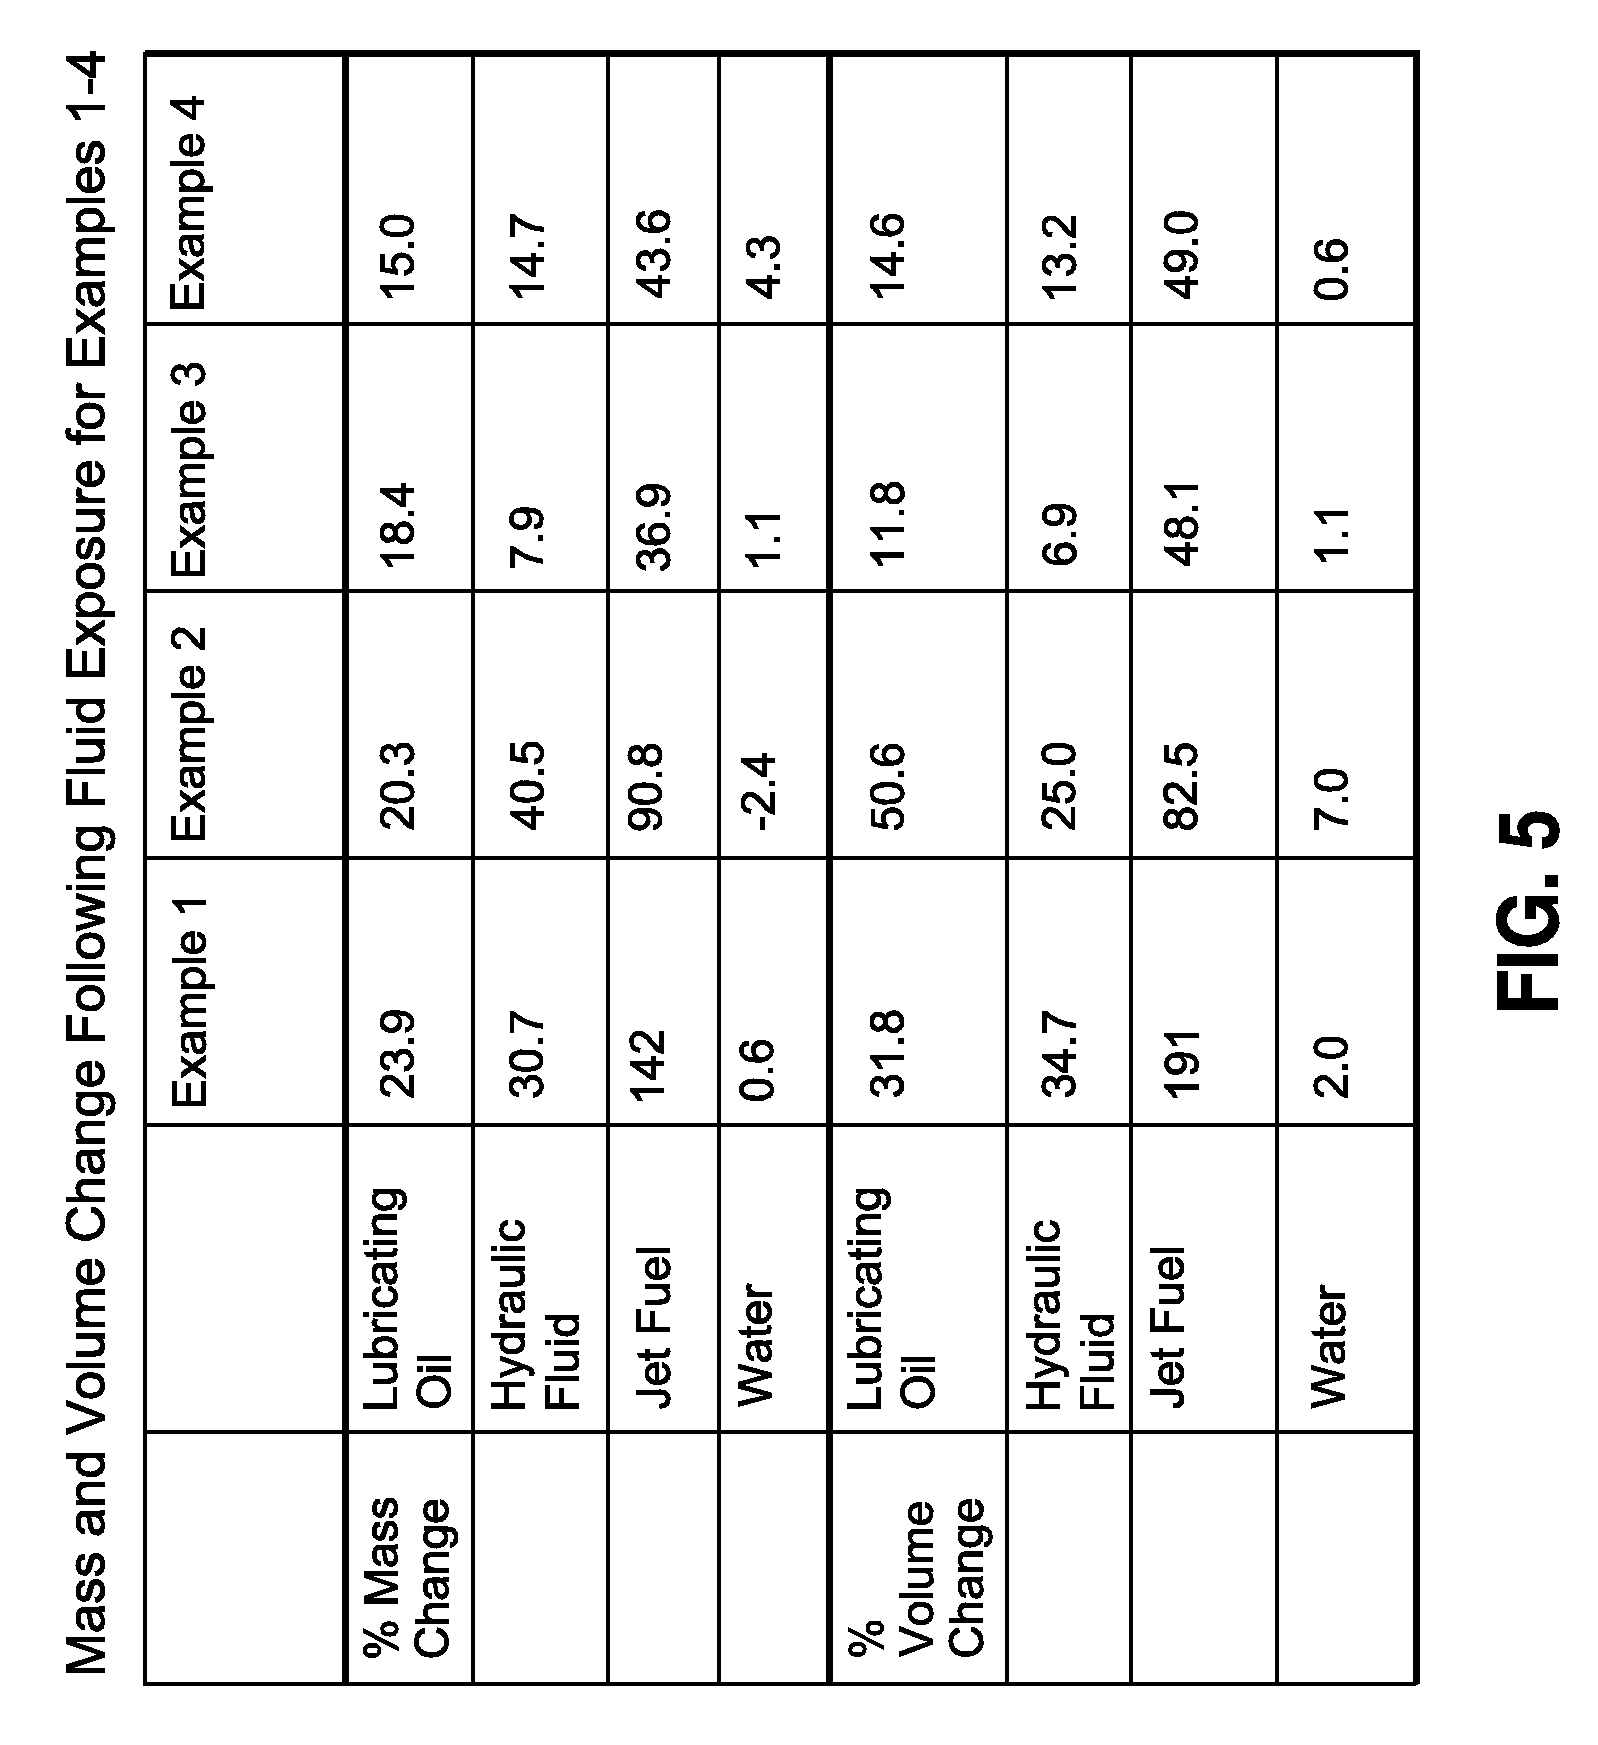 Low temperature segmented copolymer compositions and methods